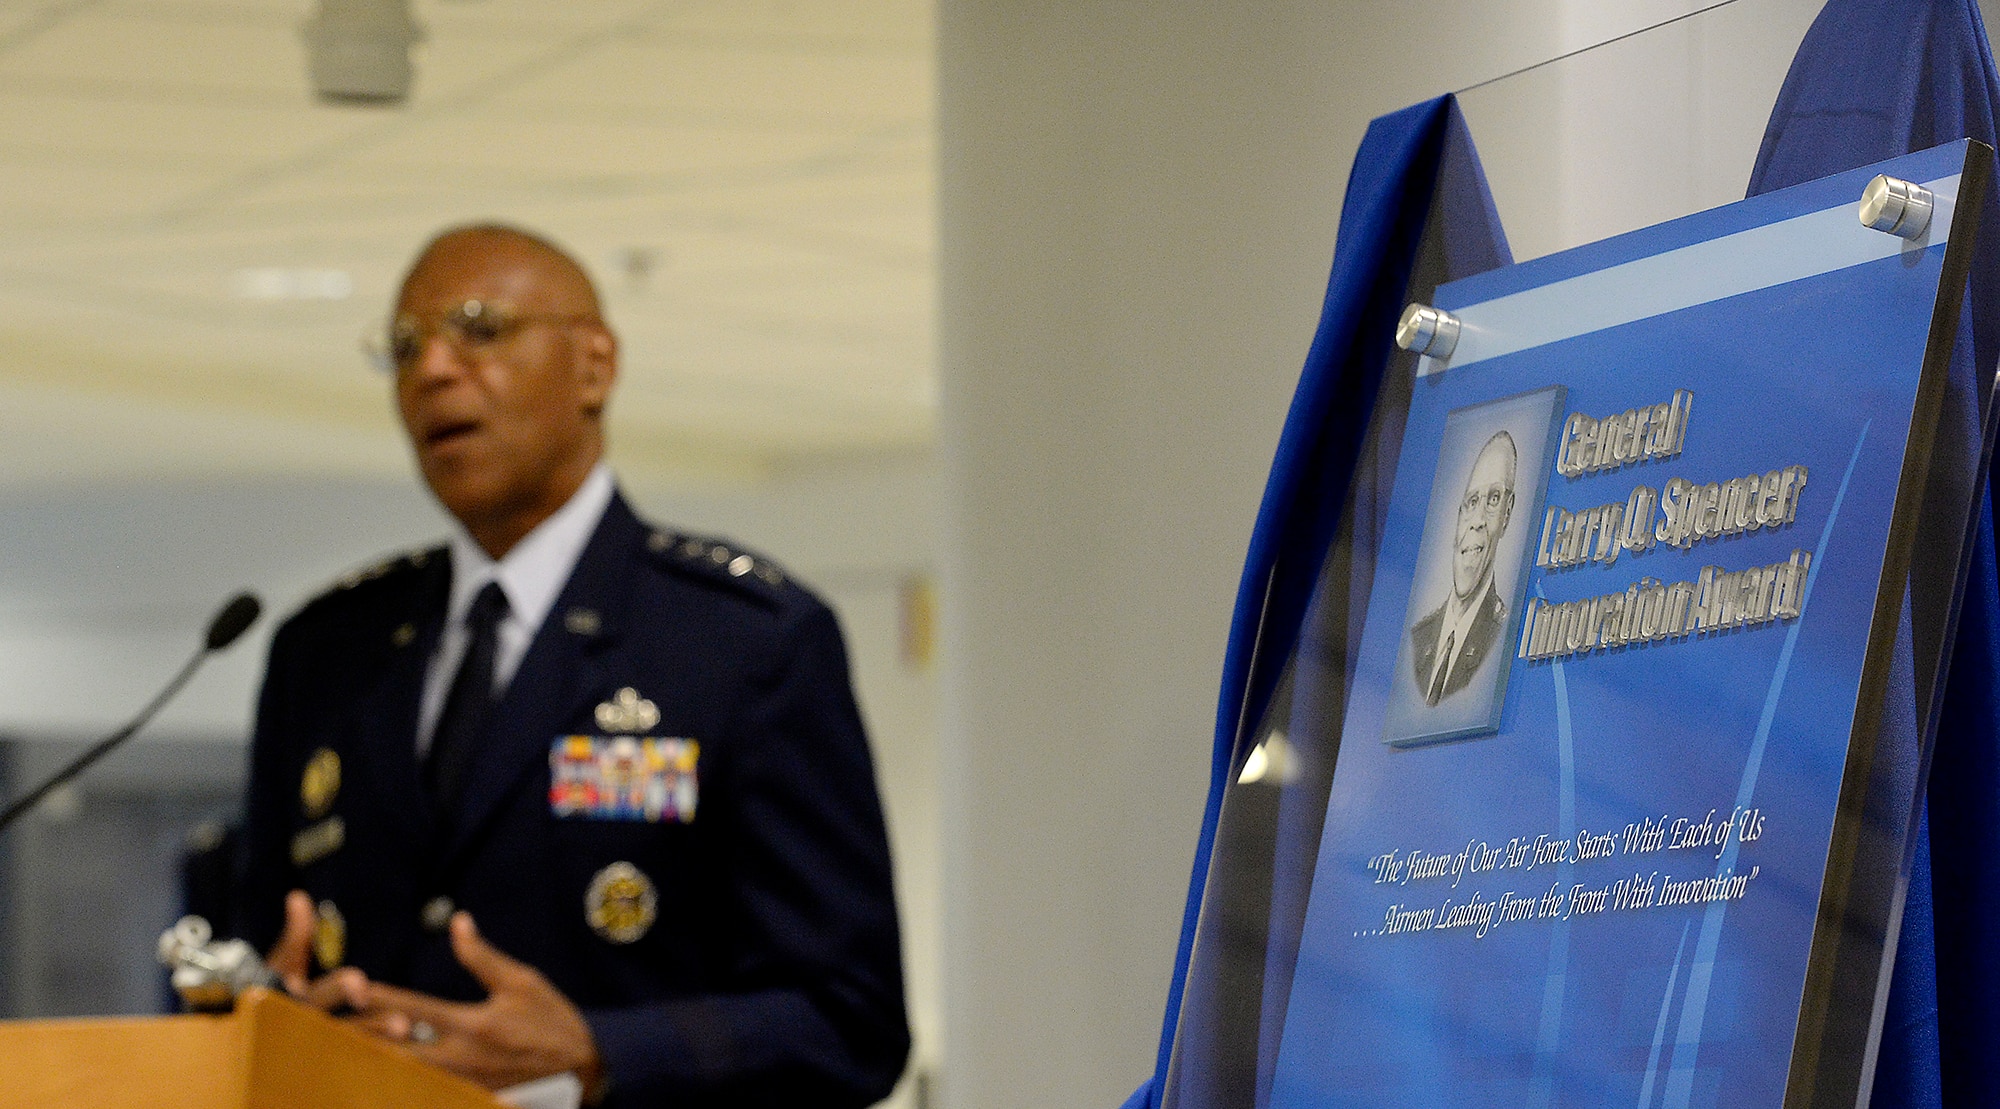 Air Force Vice Chief of Staff Gen. Larry O. Spencer speaks during the ceremony where Secretary of the Air Force Deborah Lee James unveiled the Gen. Larry O. Spencer Innovation Award June 29, 2015, at the Pentagon. The idea was conceived by Air Force Chief of Staff Gen. Mark A. Welsh III to recognize Airmen who share their creative and efficient ways to save money and time. (U.S. Air Force photo/Scott M. Ash)